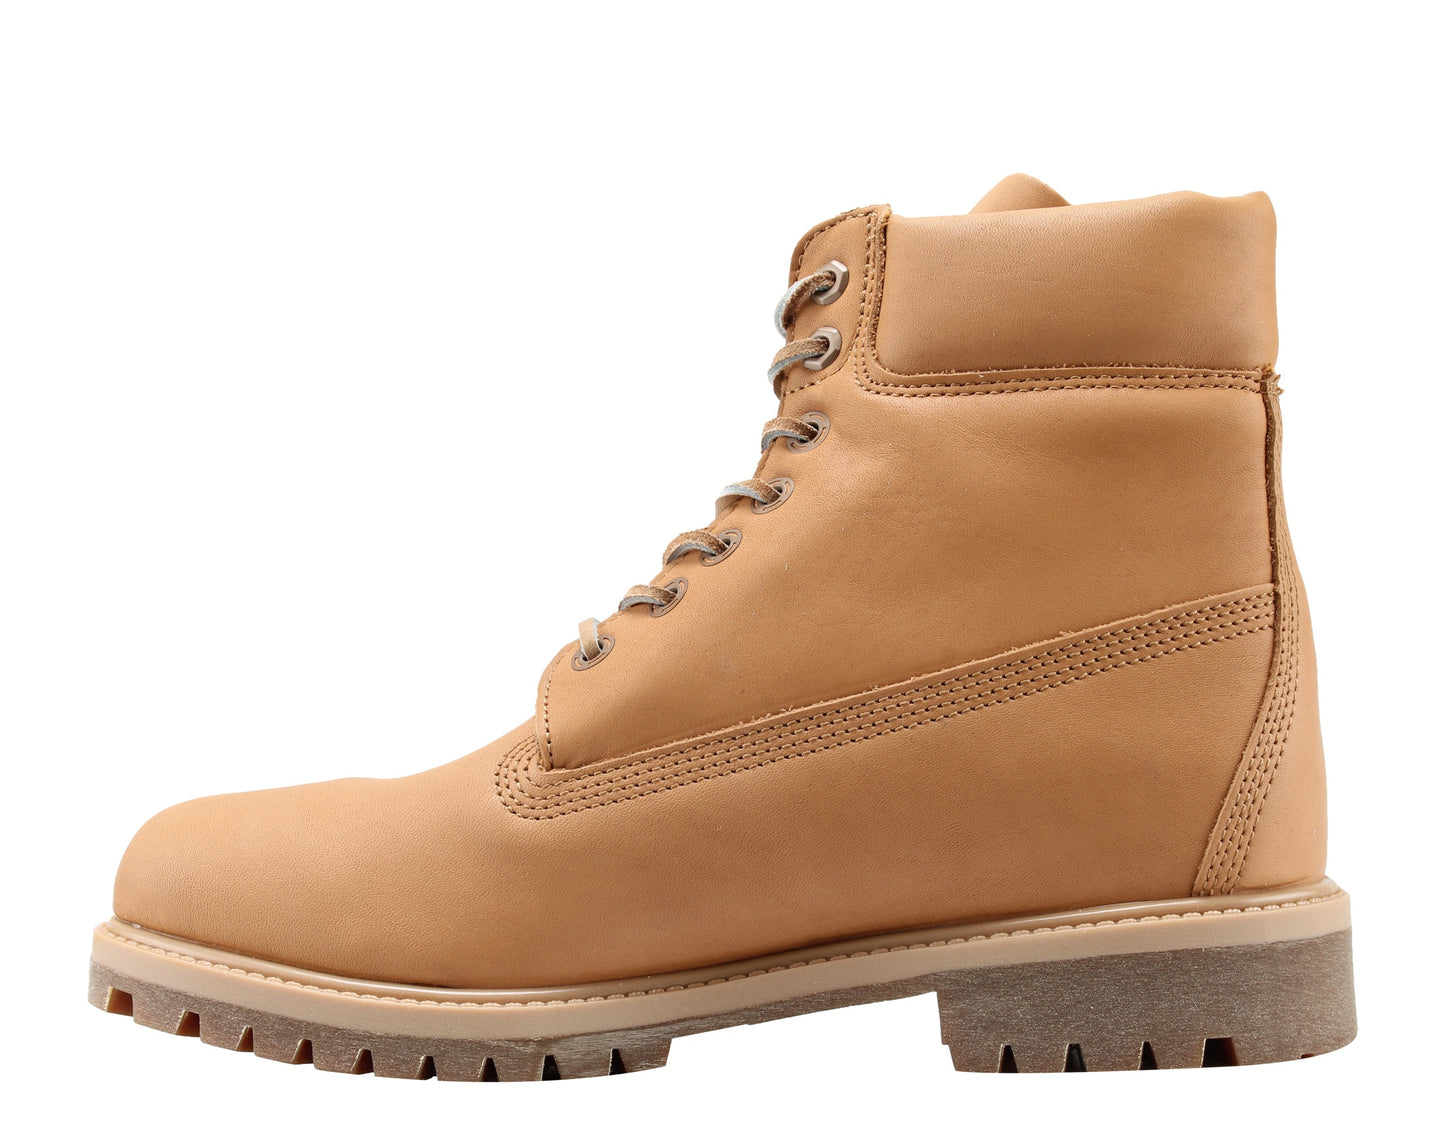 Timberland 6-Inch Premium Waterproof Natural Horween Limited Men's Boots A1JJB